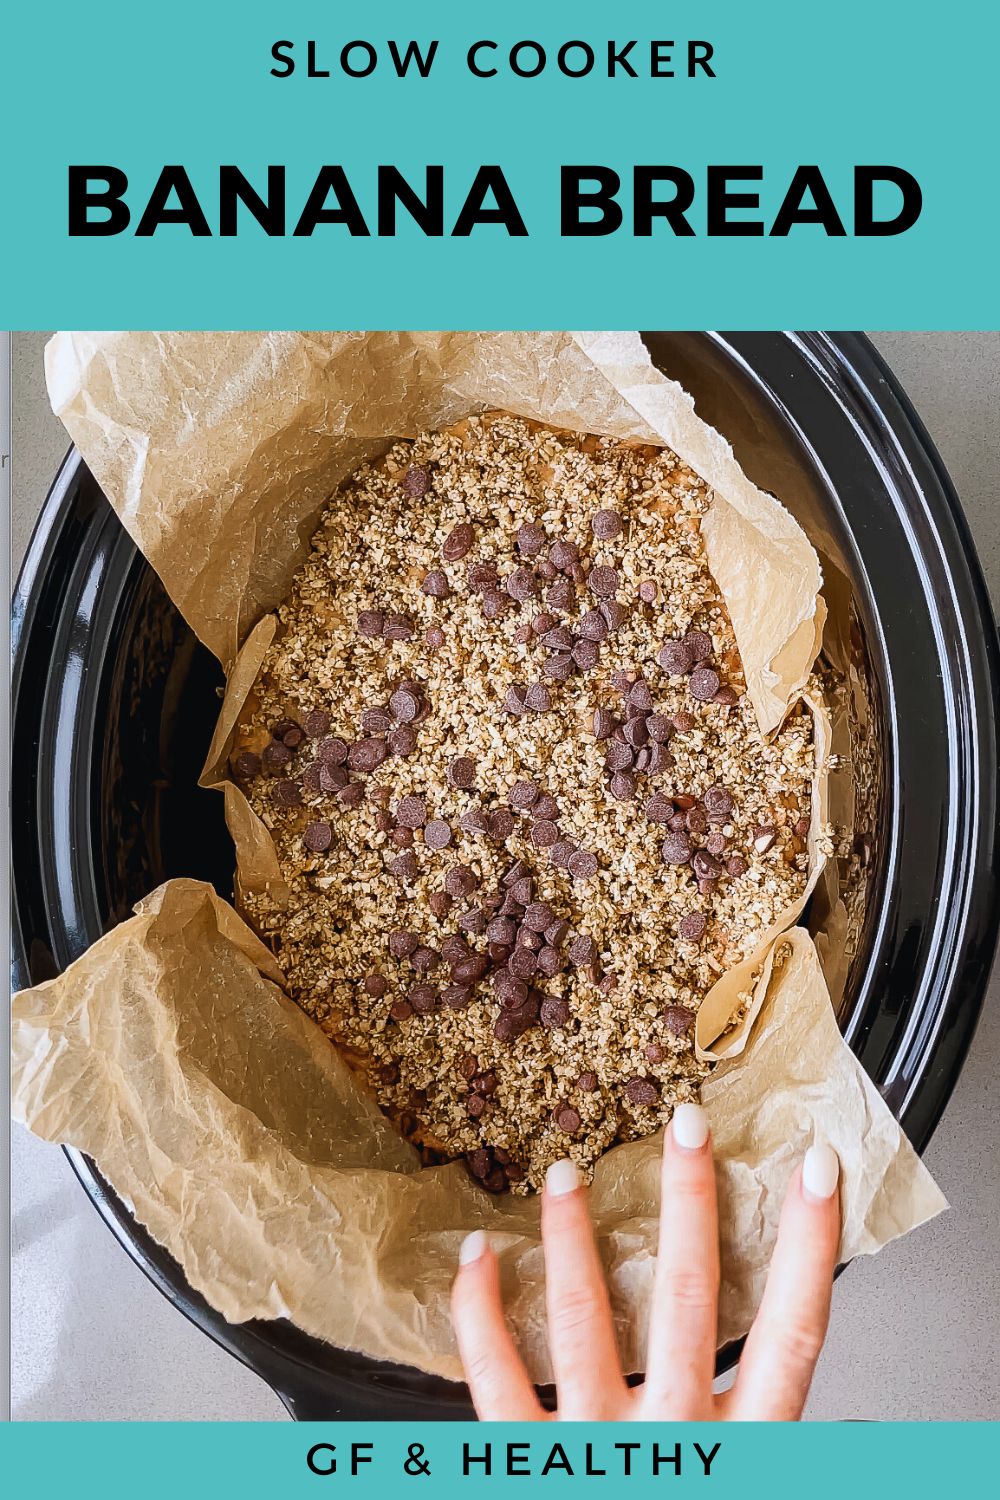 Healthy Slow Cooker Banana Bread - Gluten-Free! - Stacey Clare